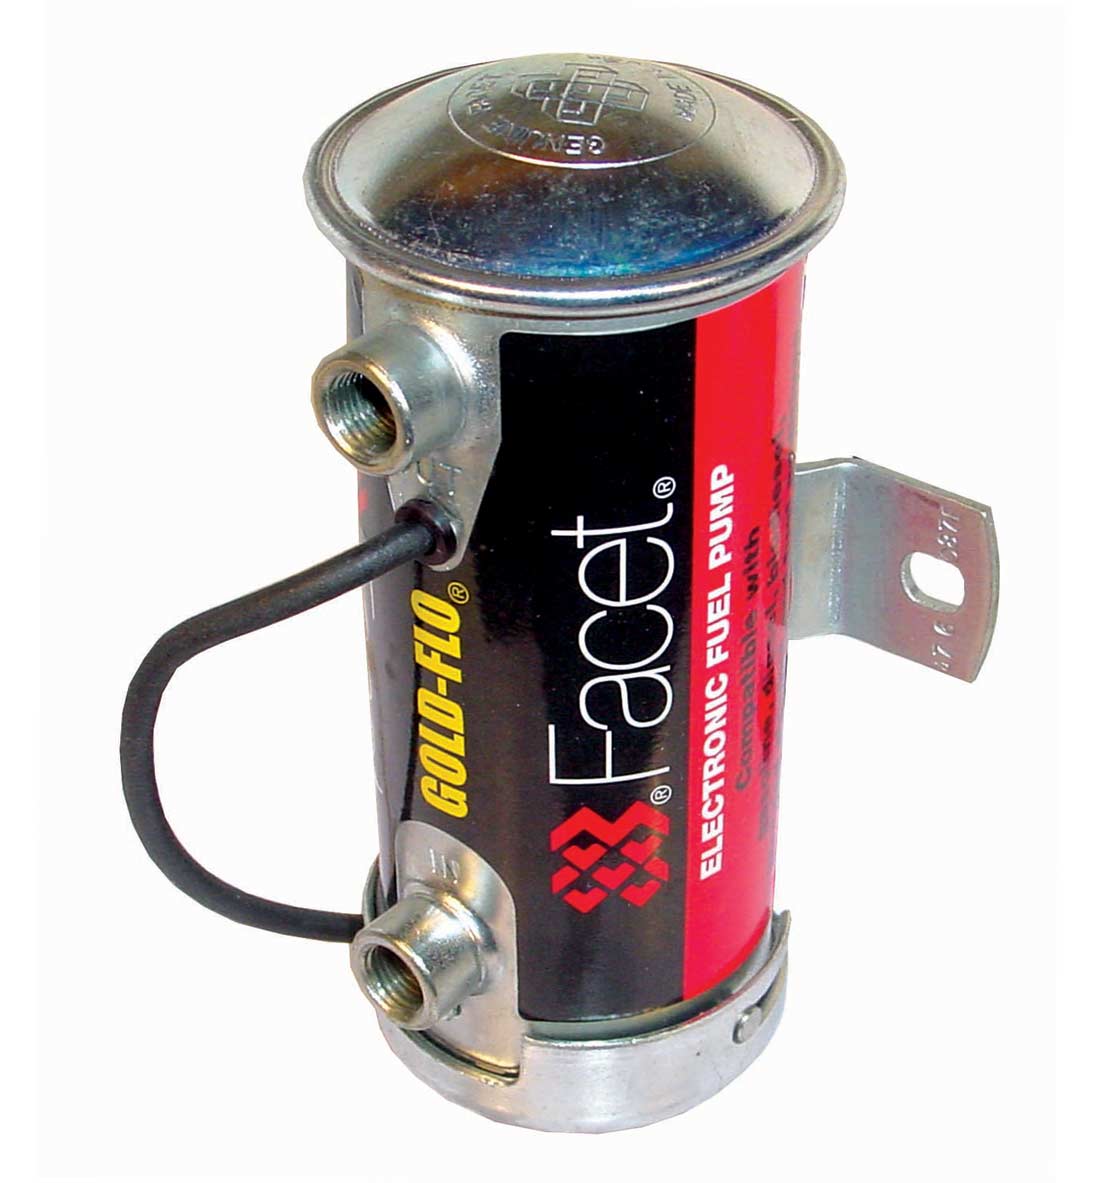 Facet Cylindrical Silver Top Fuel Pump 6-7 PSI - 35 GPH